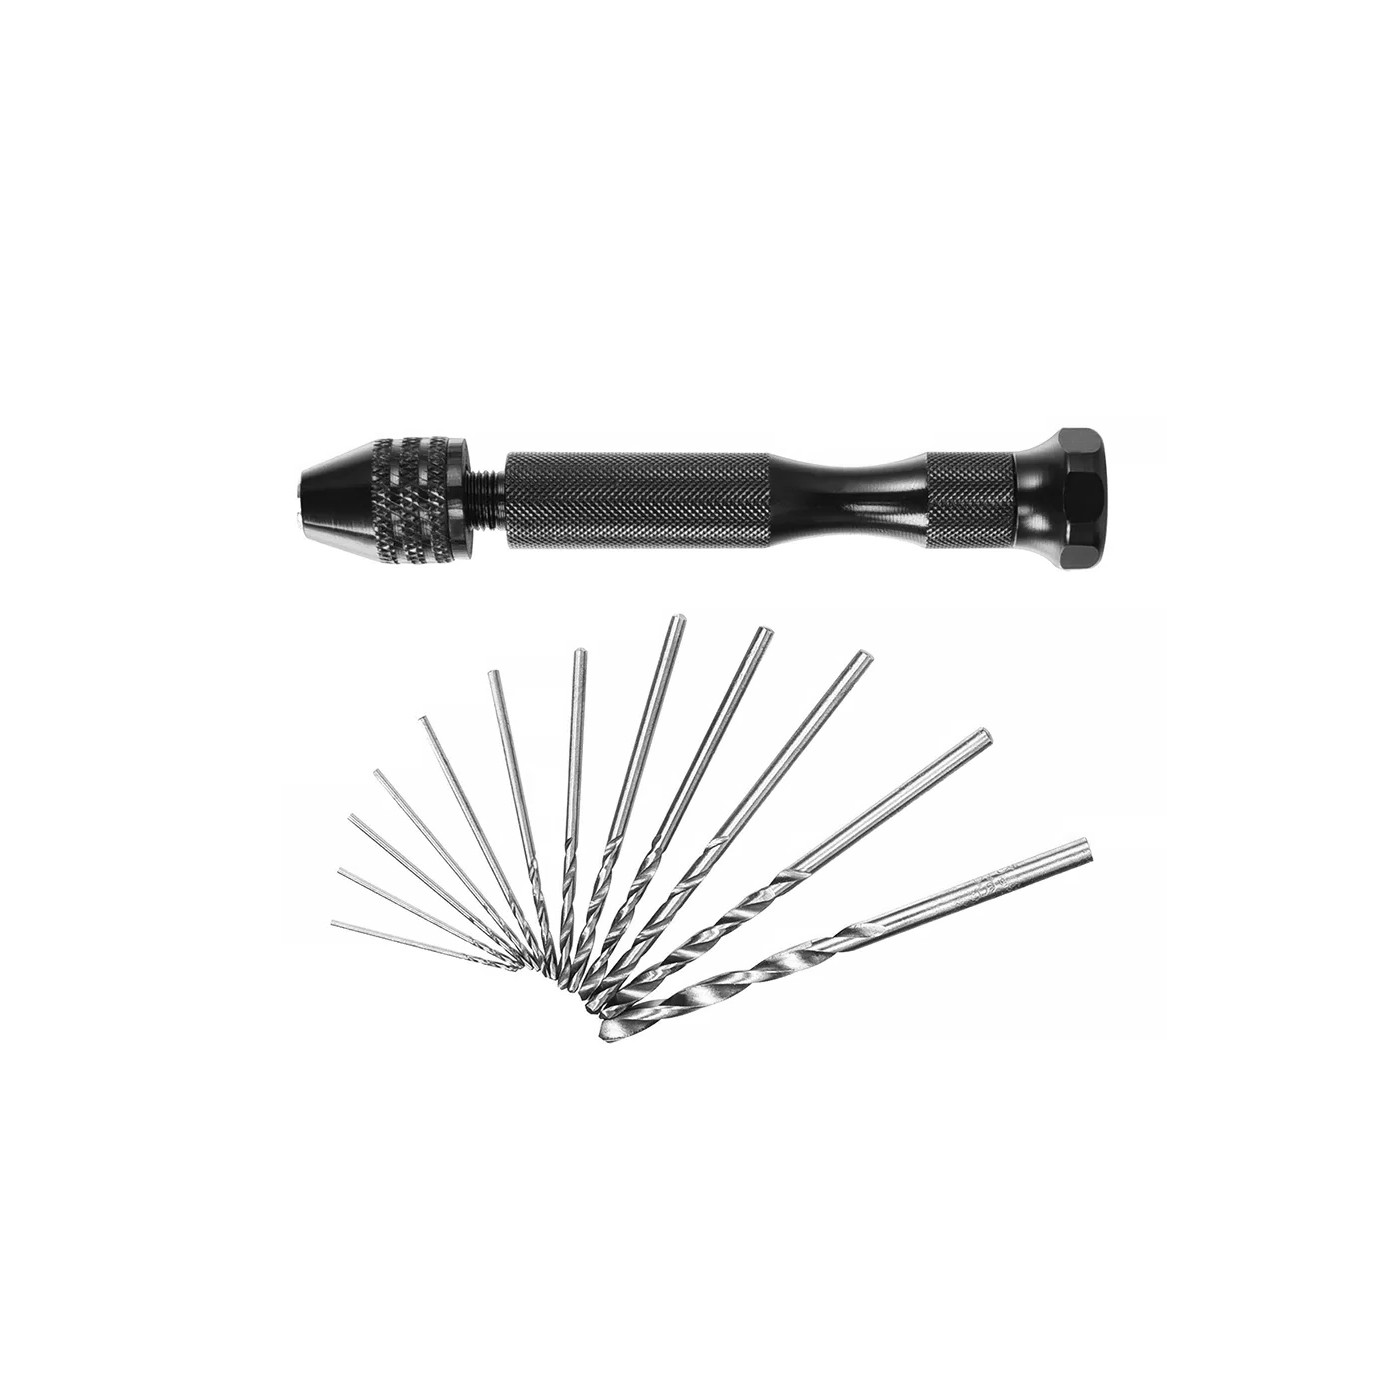 Solid hand drill with 10 drill bits (black, 0.8-3.0 mm)